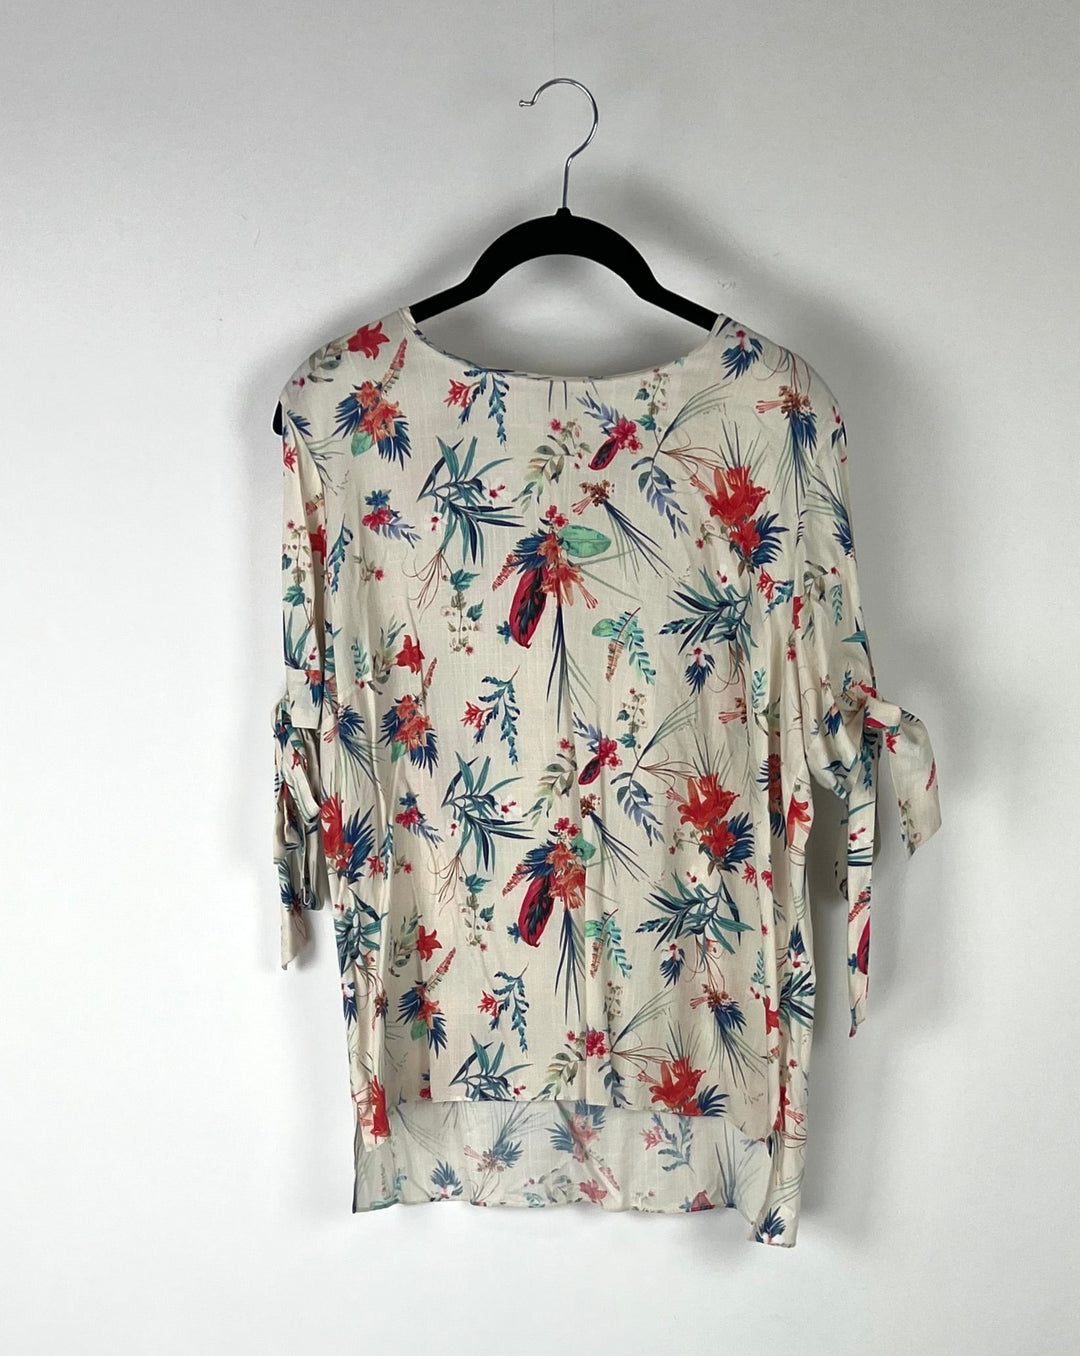 Floral Tie Top - Small